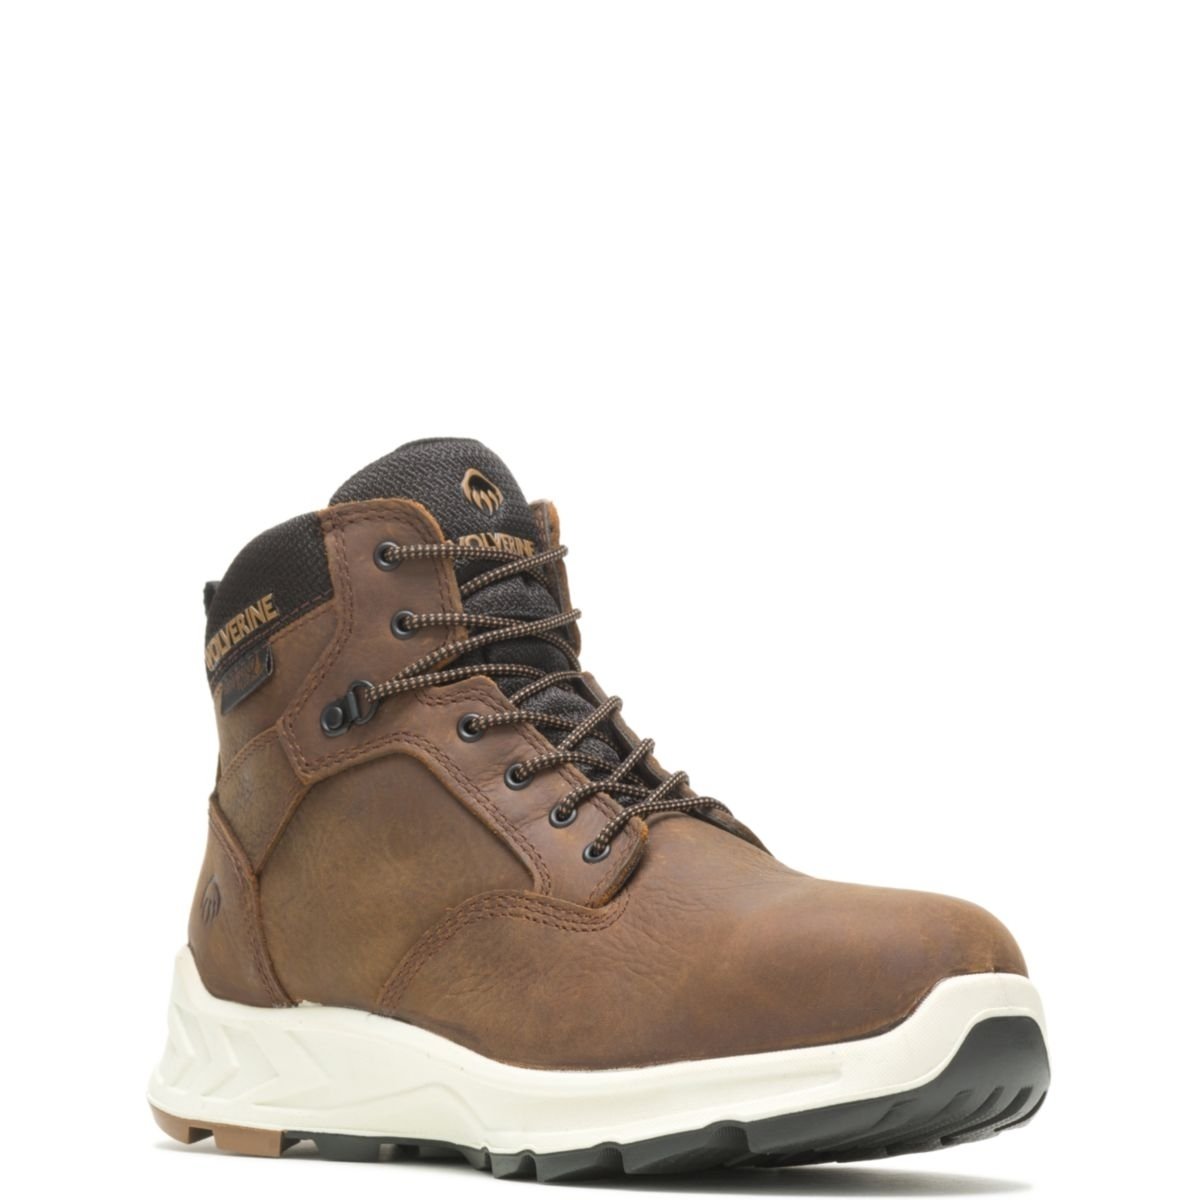 WOLVERINE Men's ShiftPlus Work LX 6 Alloy Toe Work Boot Brown - W201156 BROWN - BROWN, 11-M